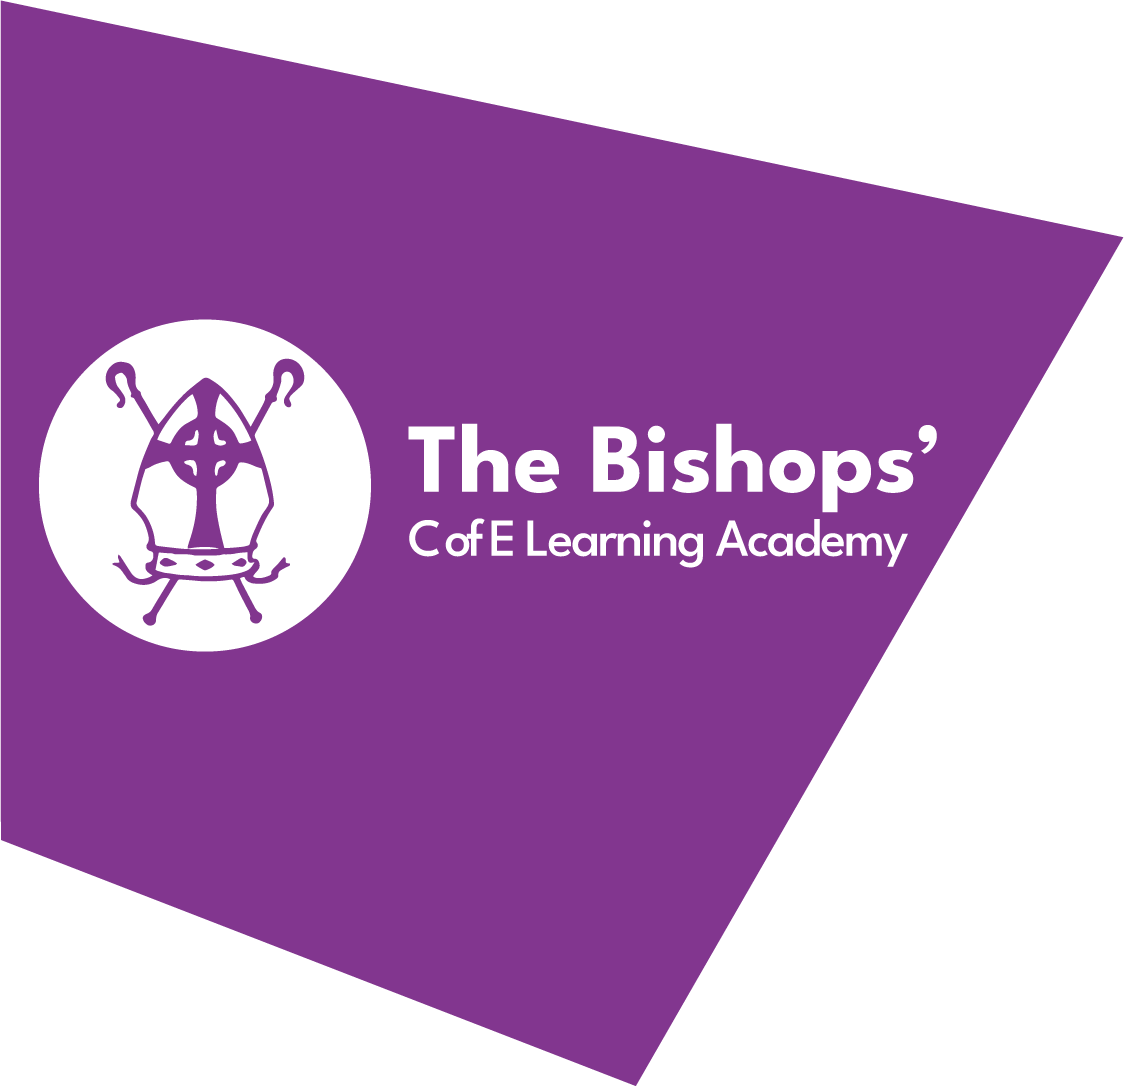 The Bishops' CofE Learning Academy